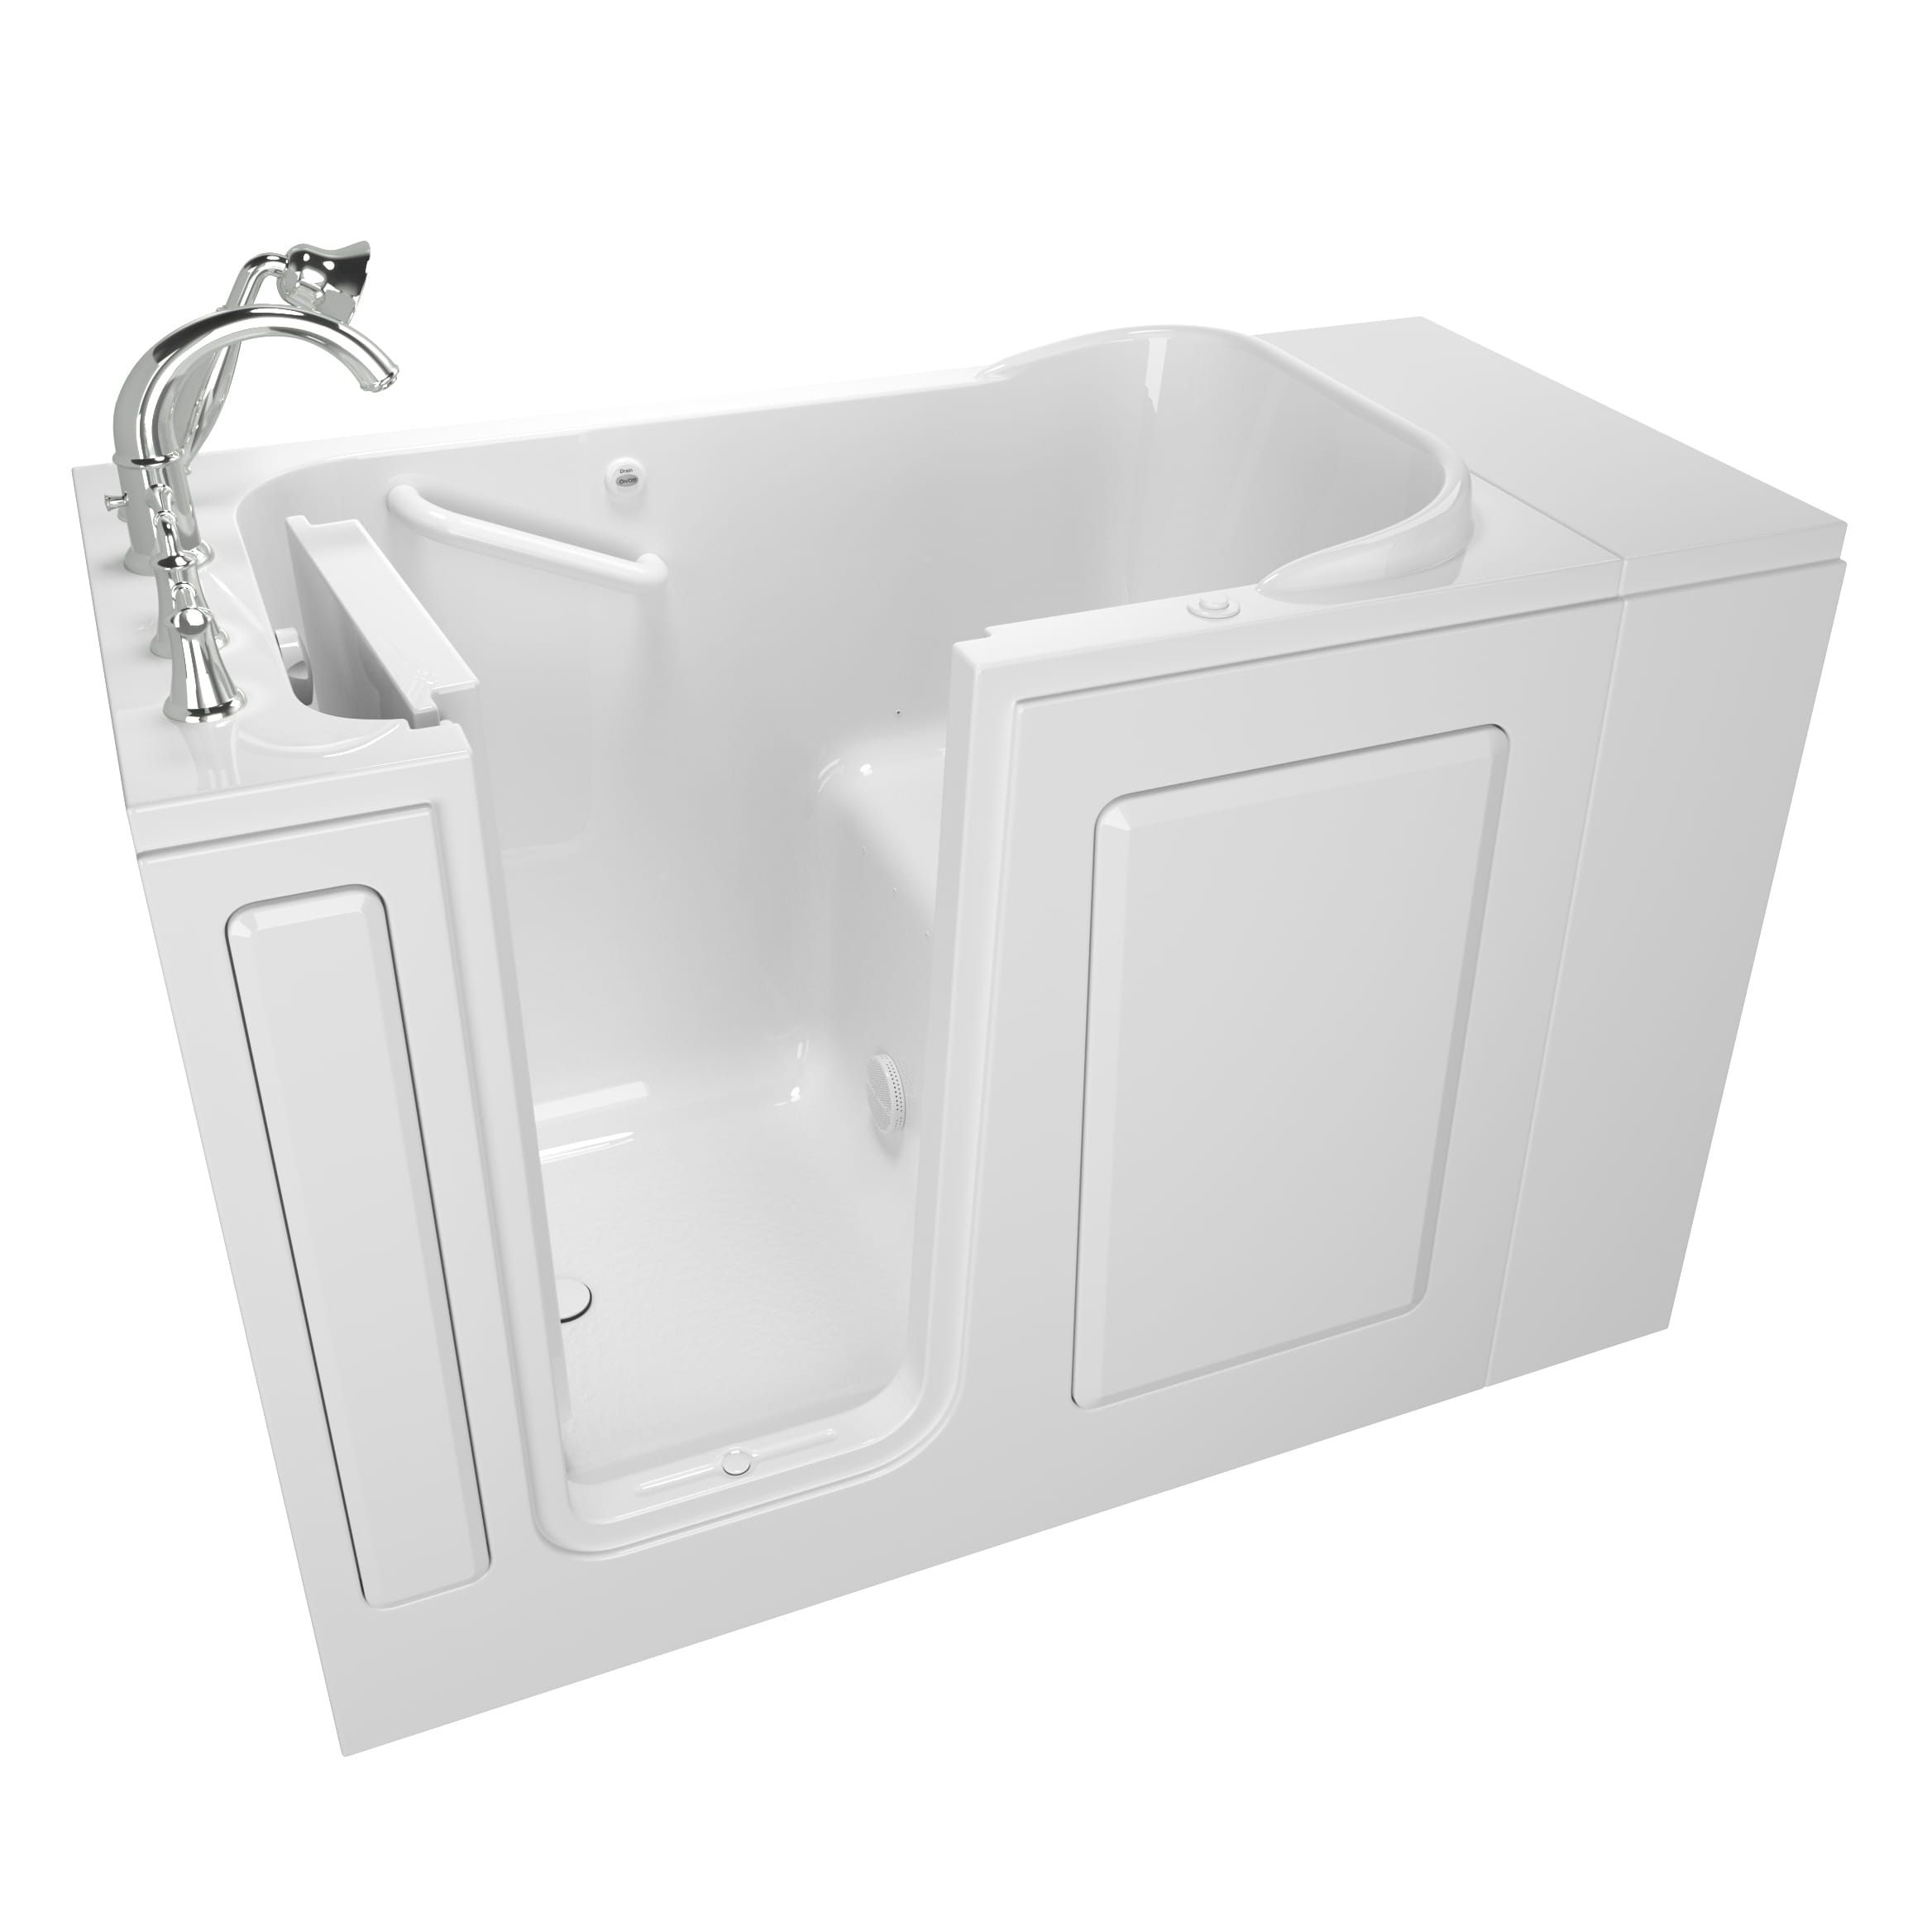 Gelcoat Value Series 28 x 48-Inch Walk-in Tub With Air Spa System - Left-Hand Drain With Faucet